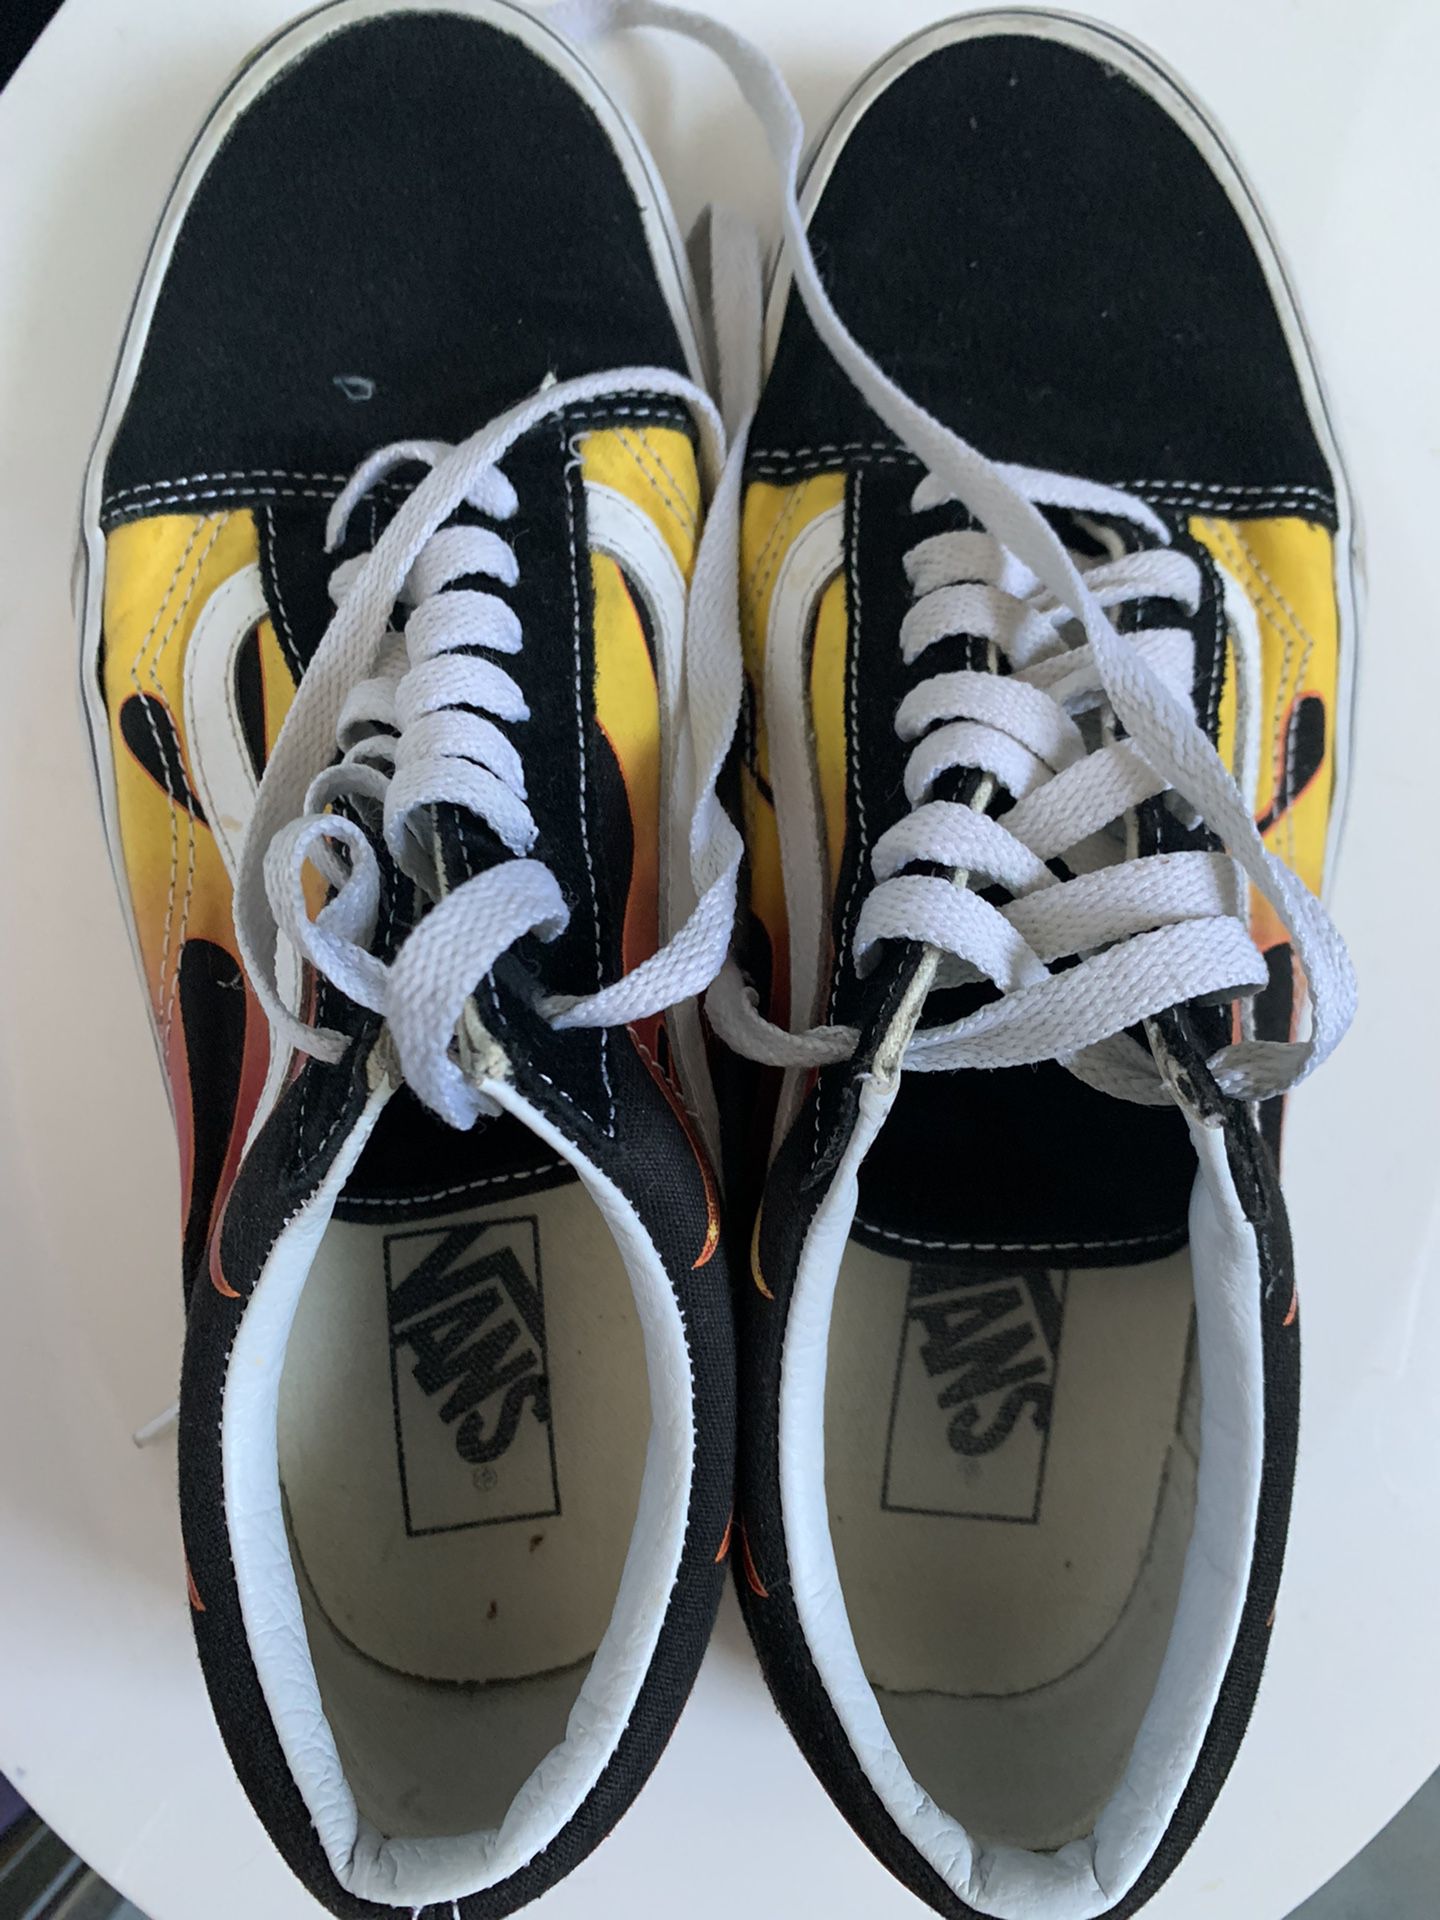 Vans Off The Wall Sneakers - Yellow And Black